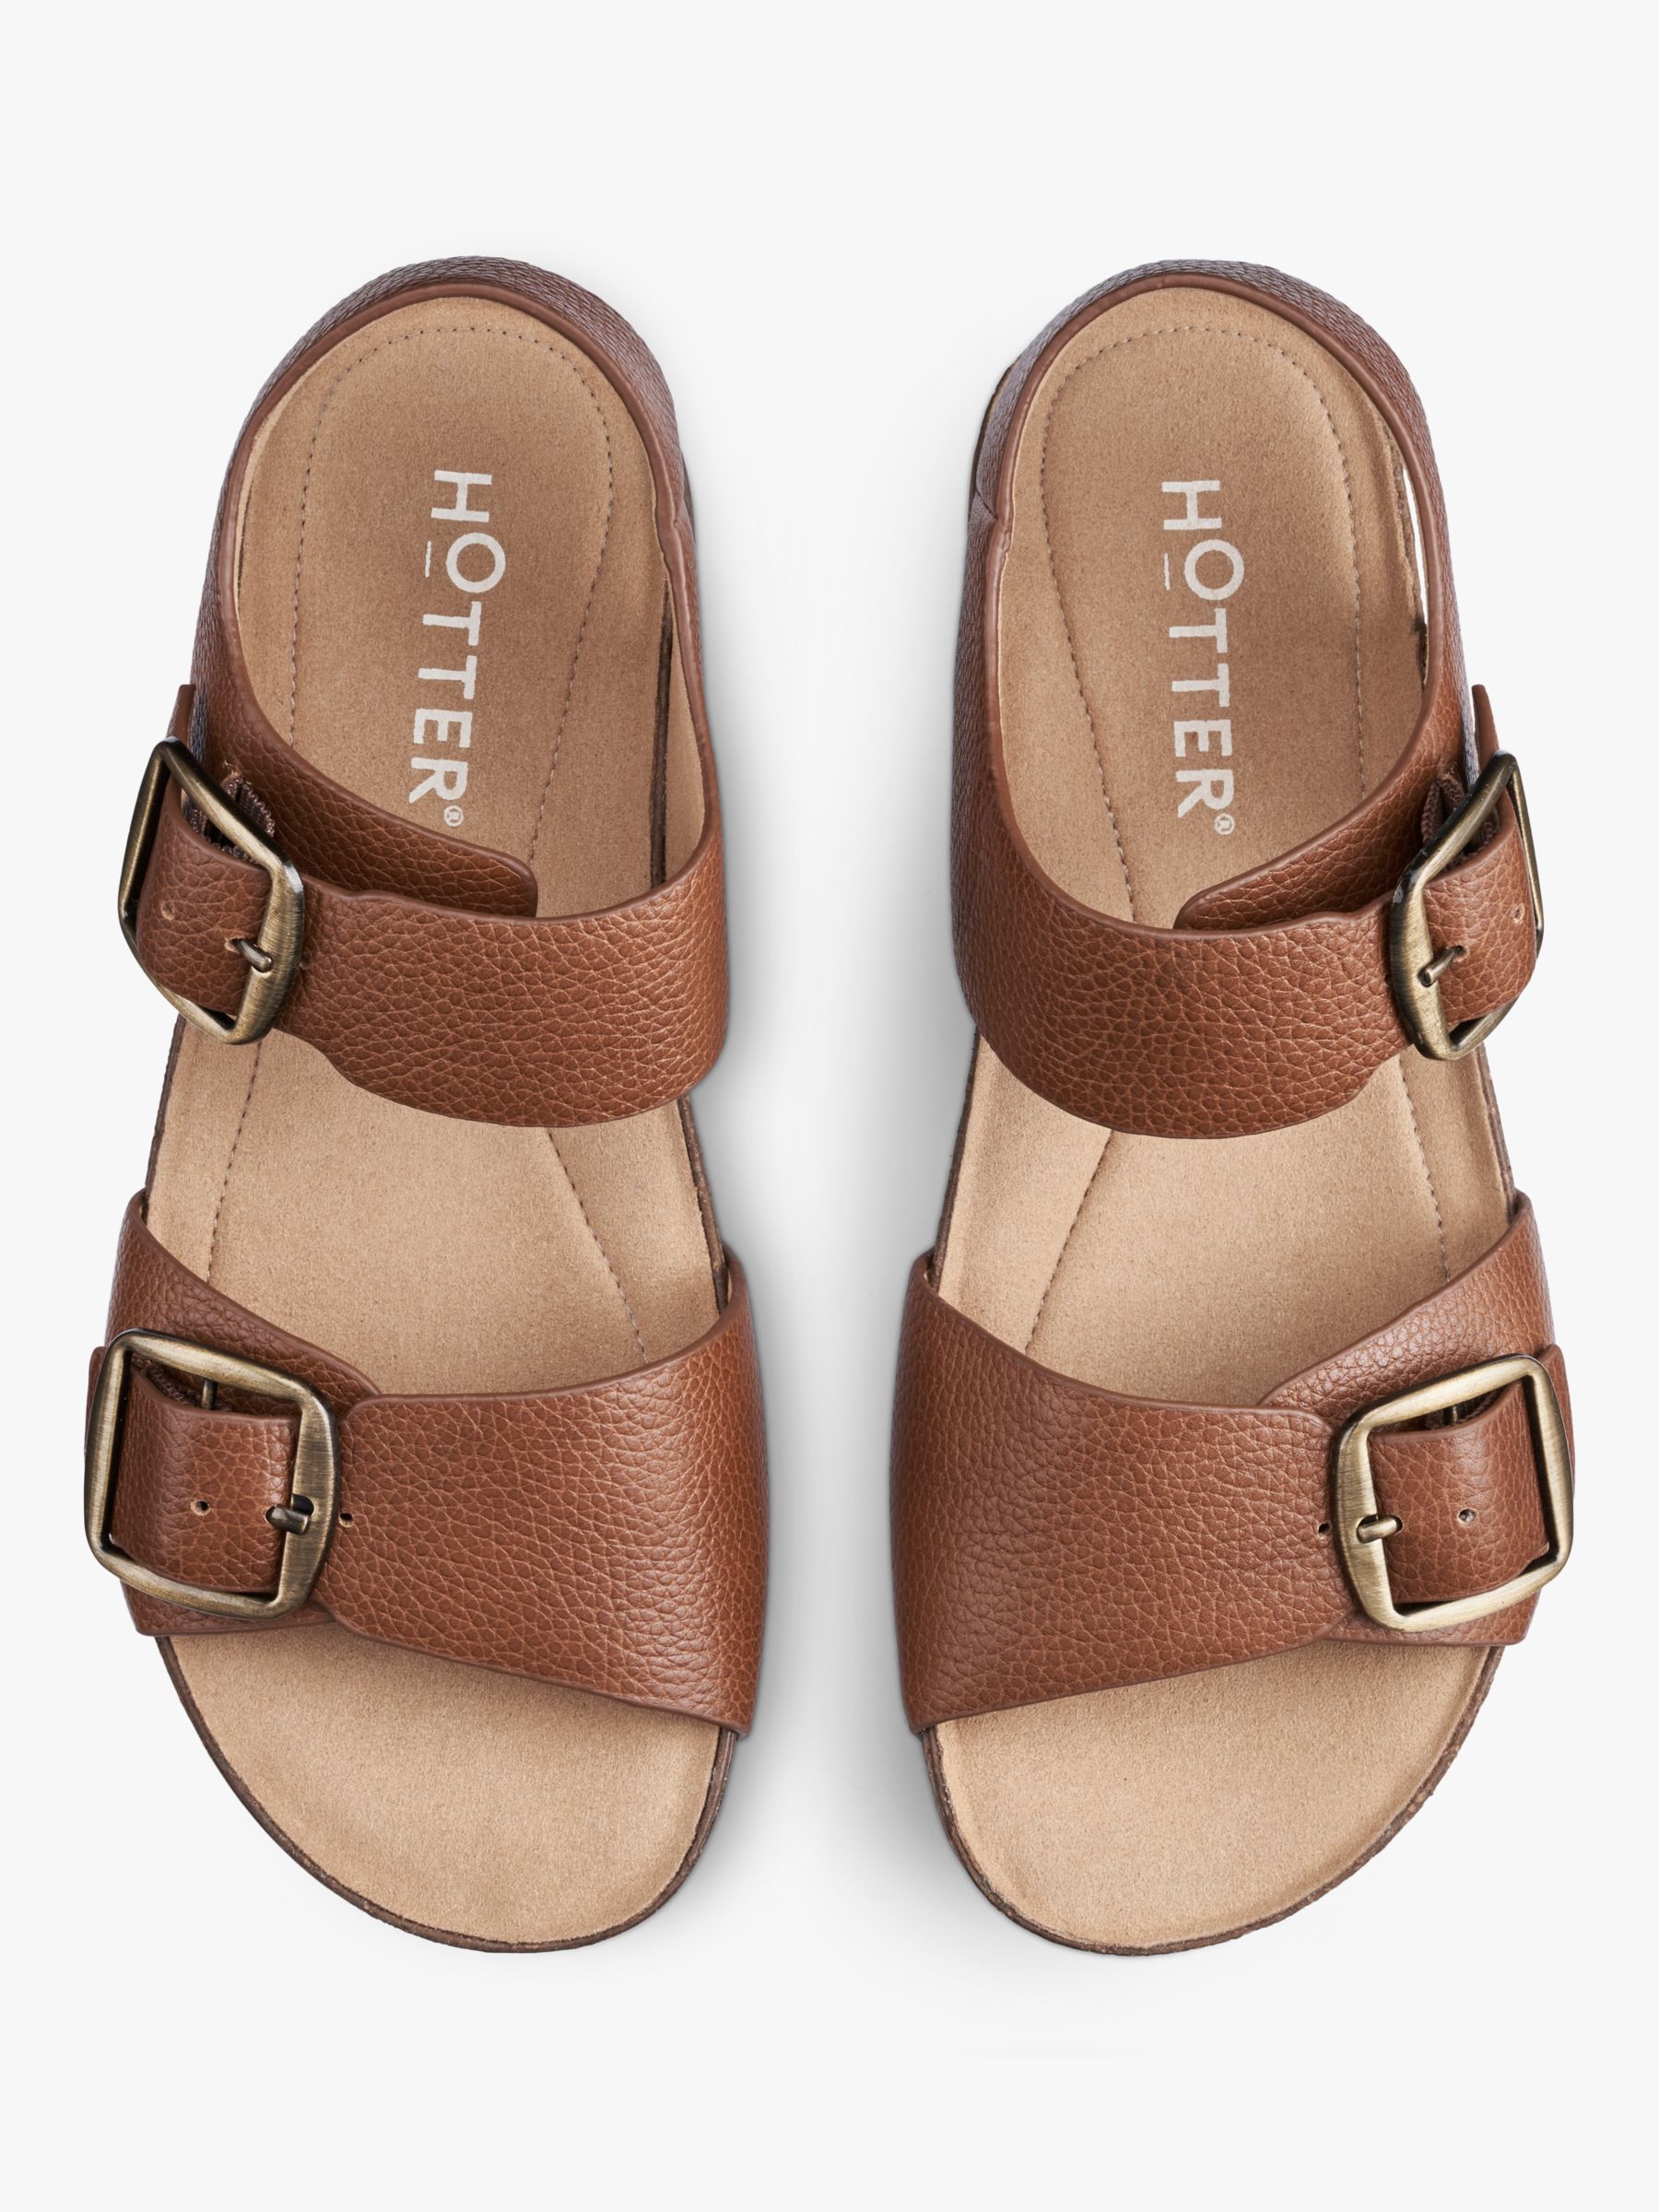 Buy Hotter Tourist II Wide Fit Classic Cork Wedge Sandals Online at johnlewis.com